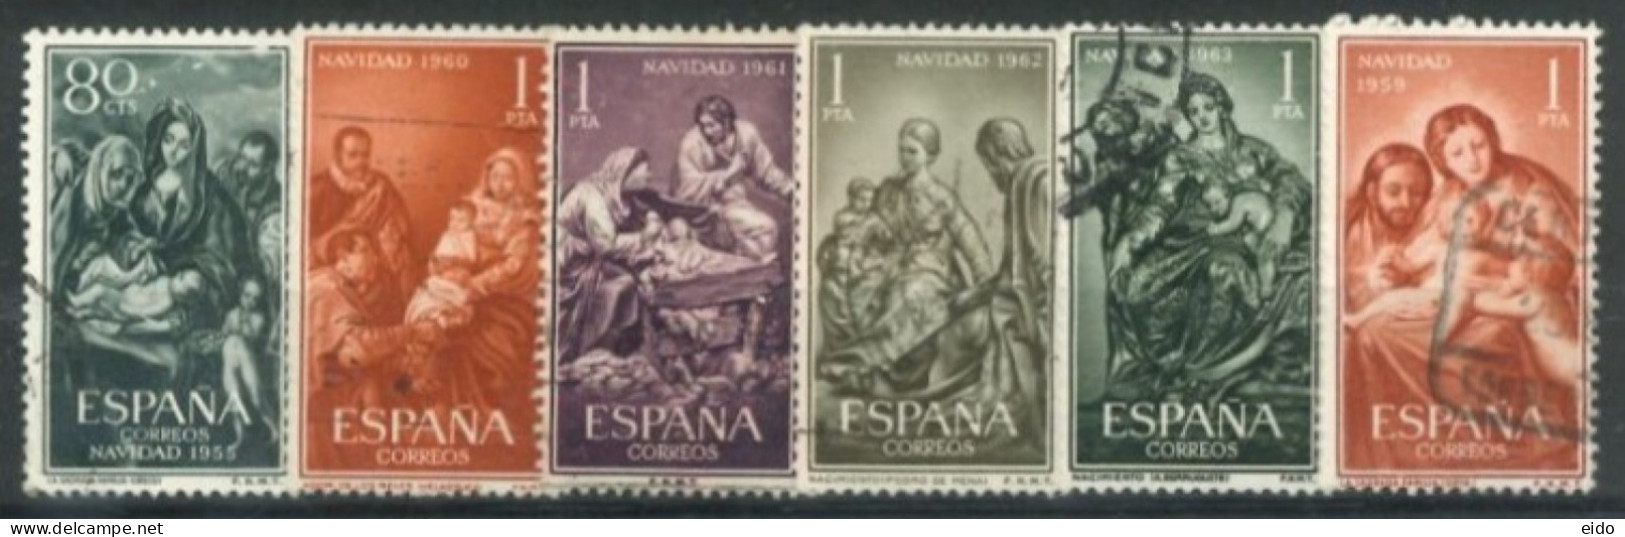 SPAIN, 1955/63, HOLY FAMILY STAMPS SET OF 6, USED. - Gebraucht